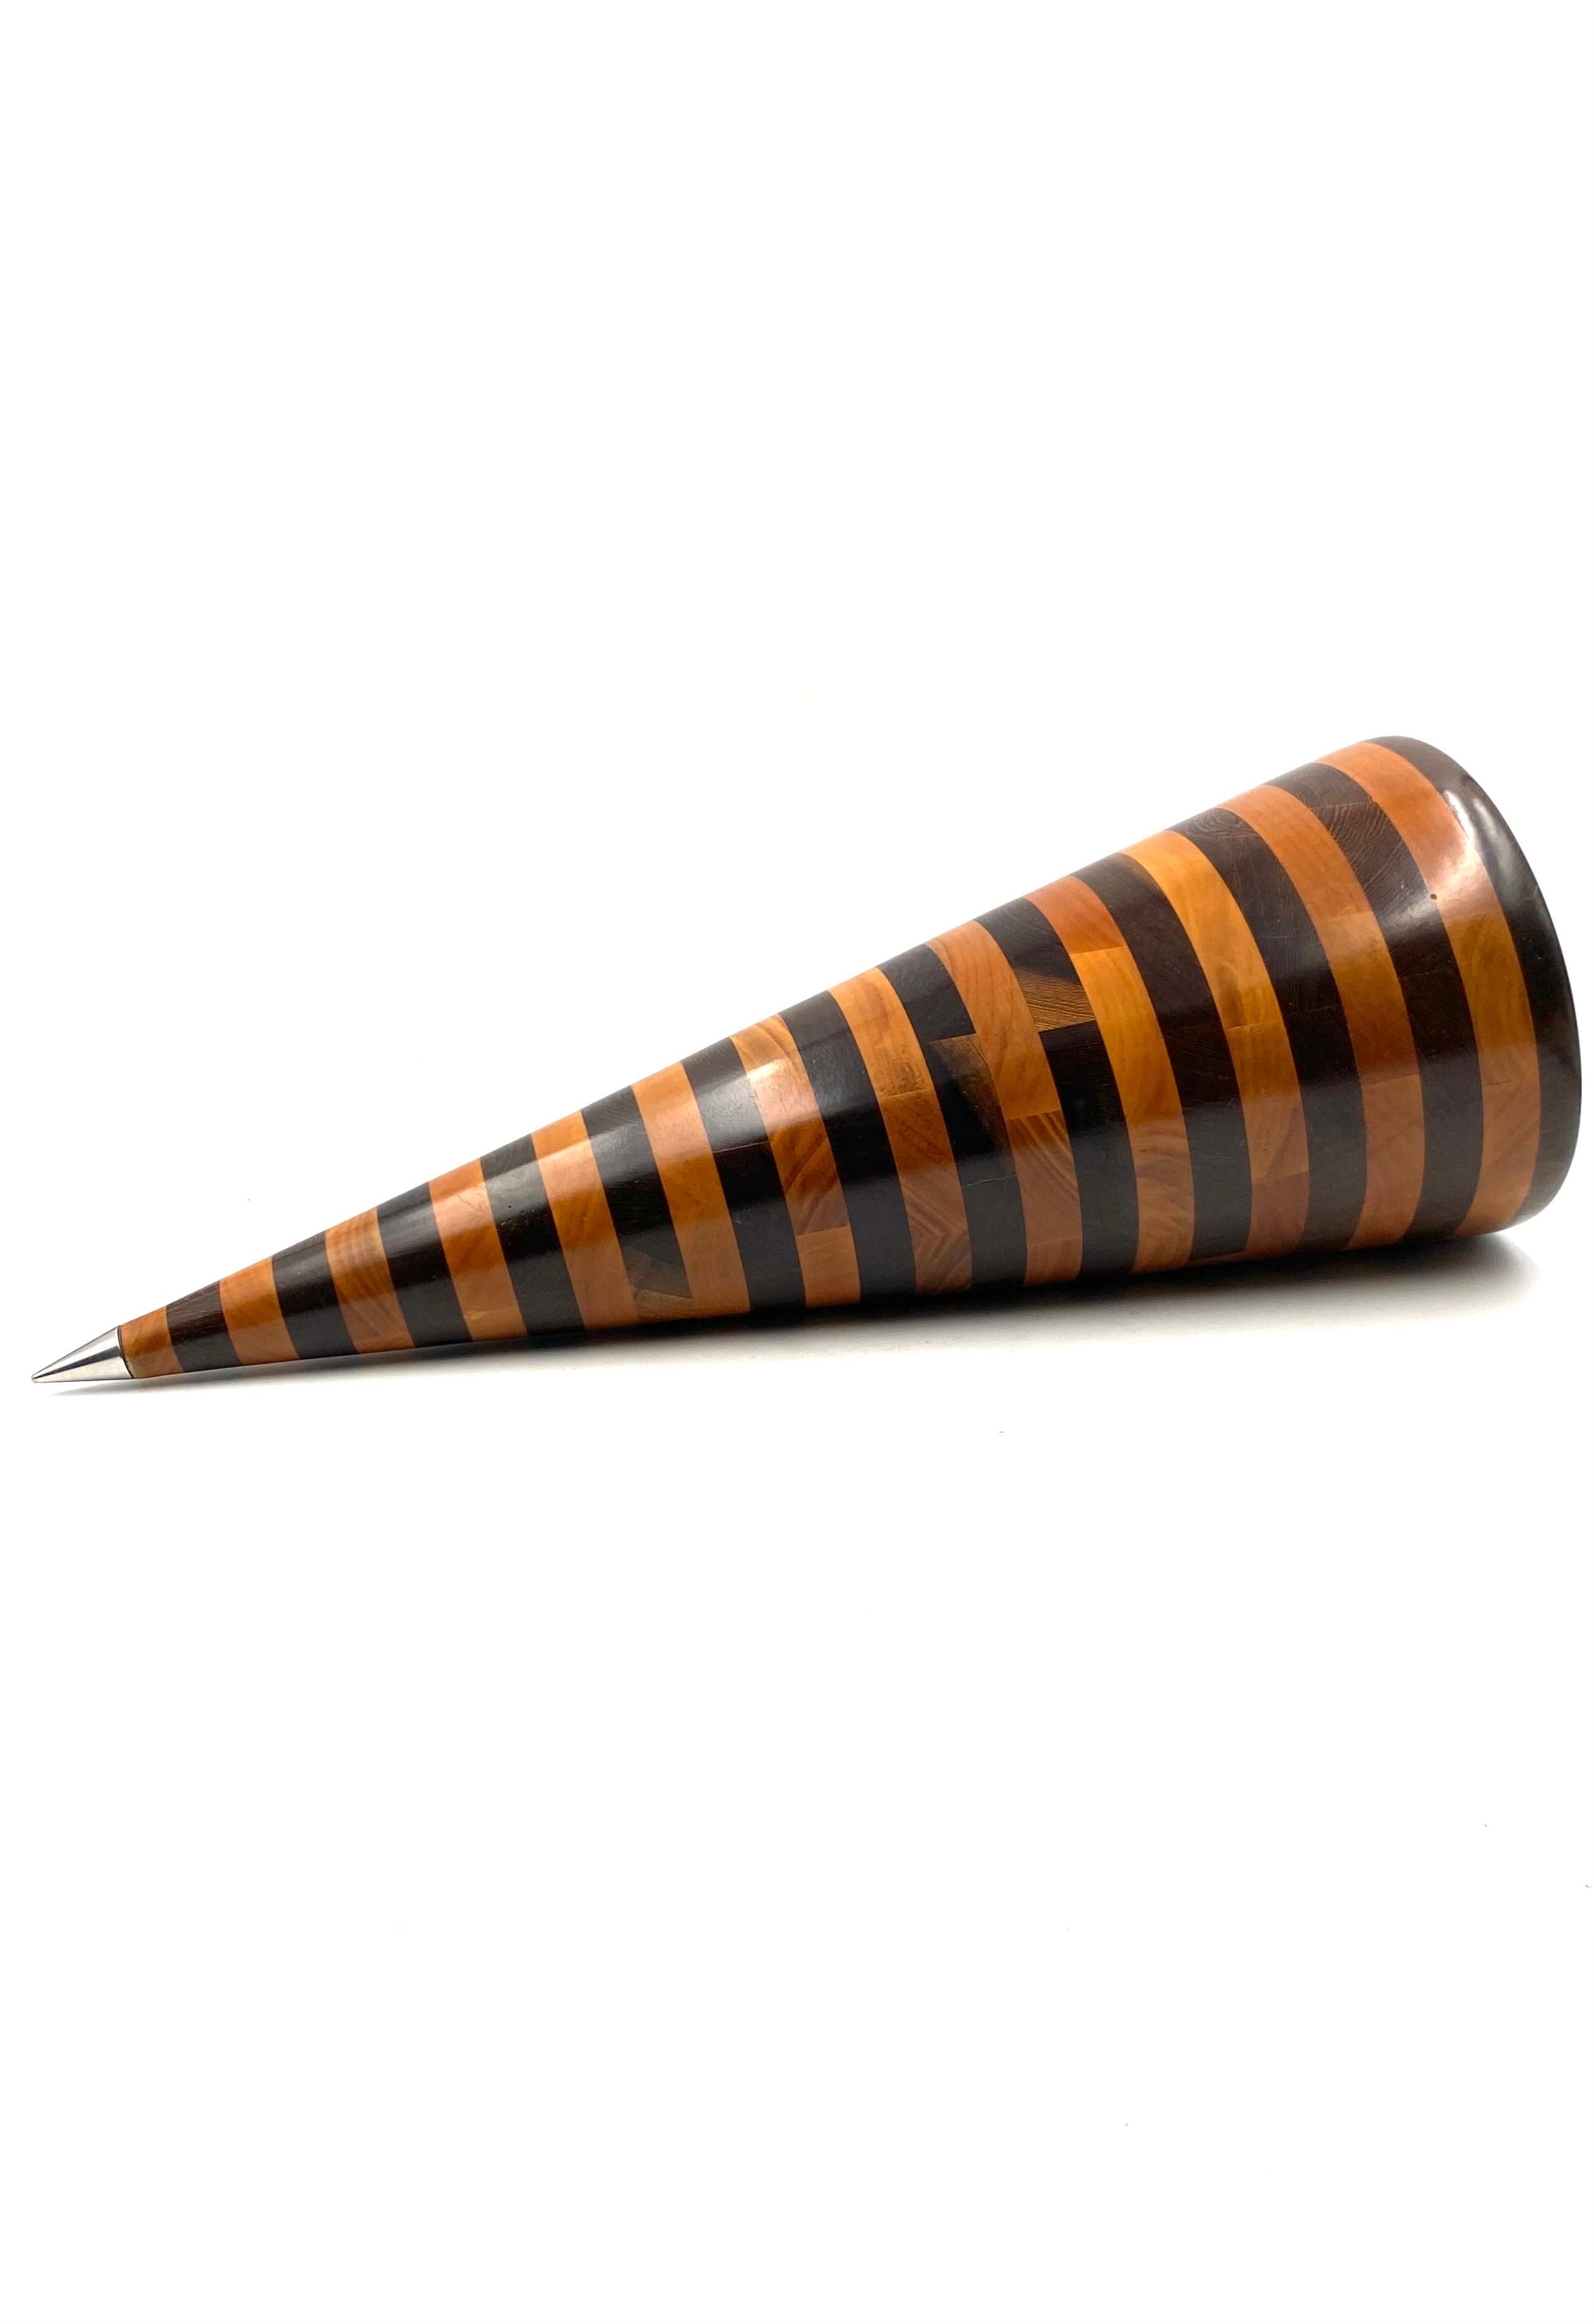 Conic Solid Wood Sculpture, Salmistraro, Italy, 1970s For Sale 6